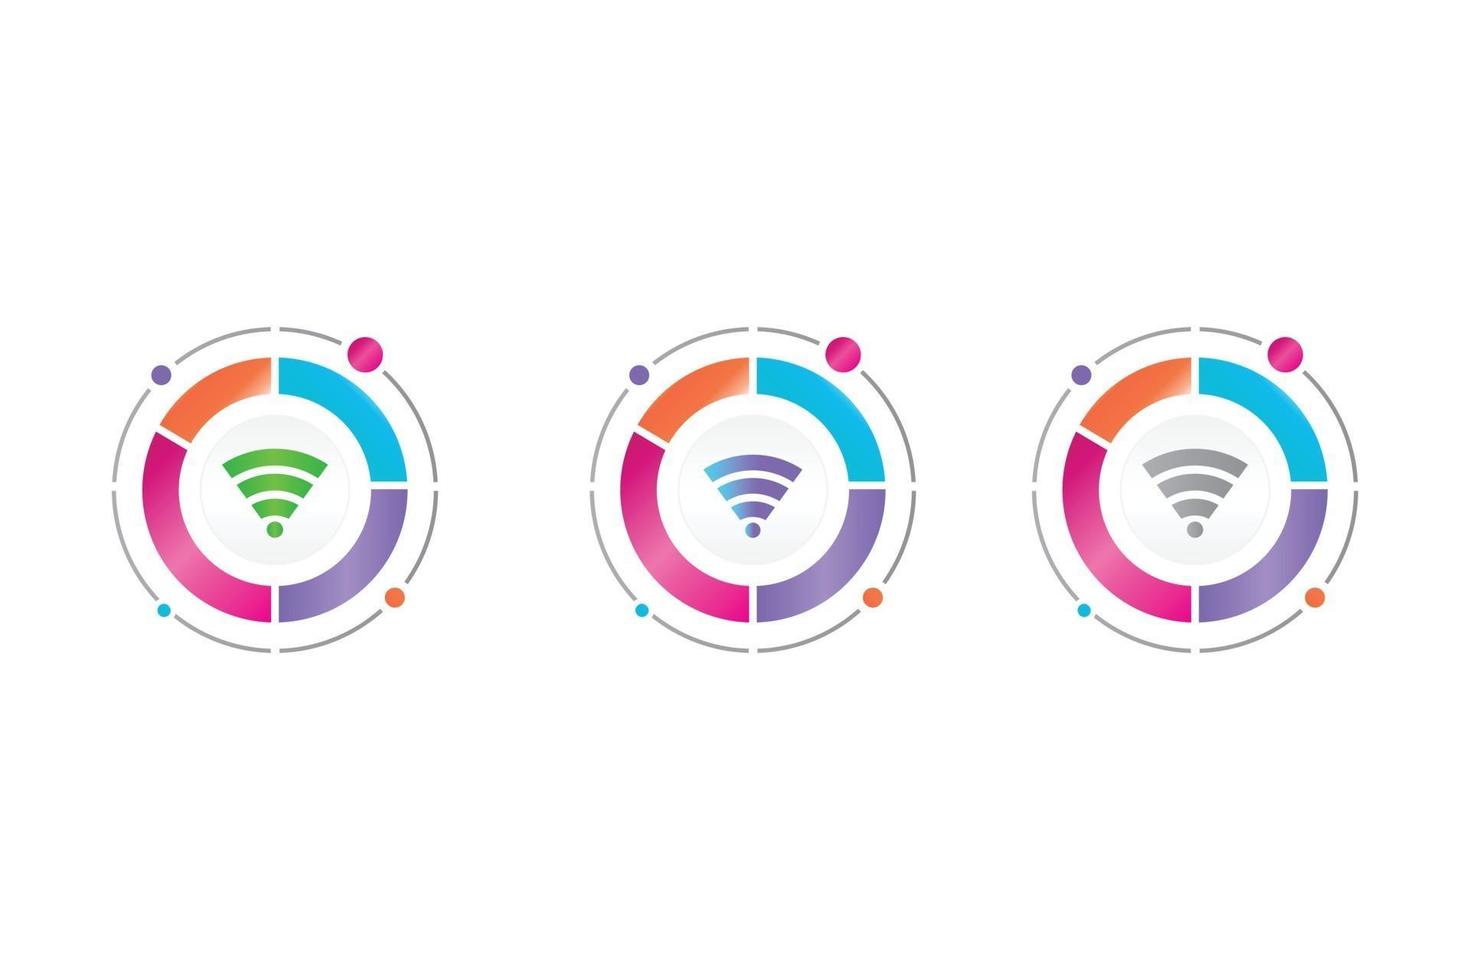 wifii icon in circle diagram vector